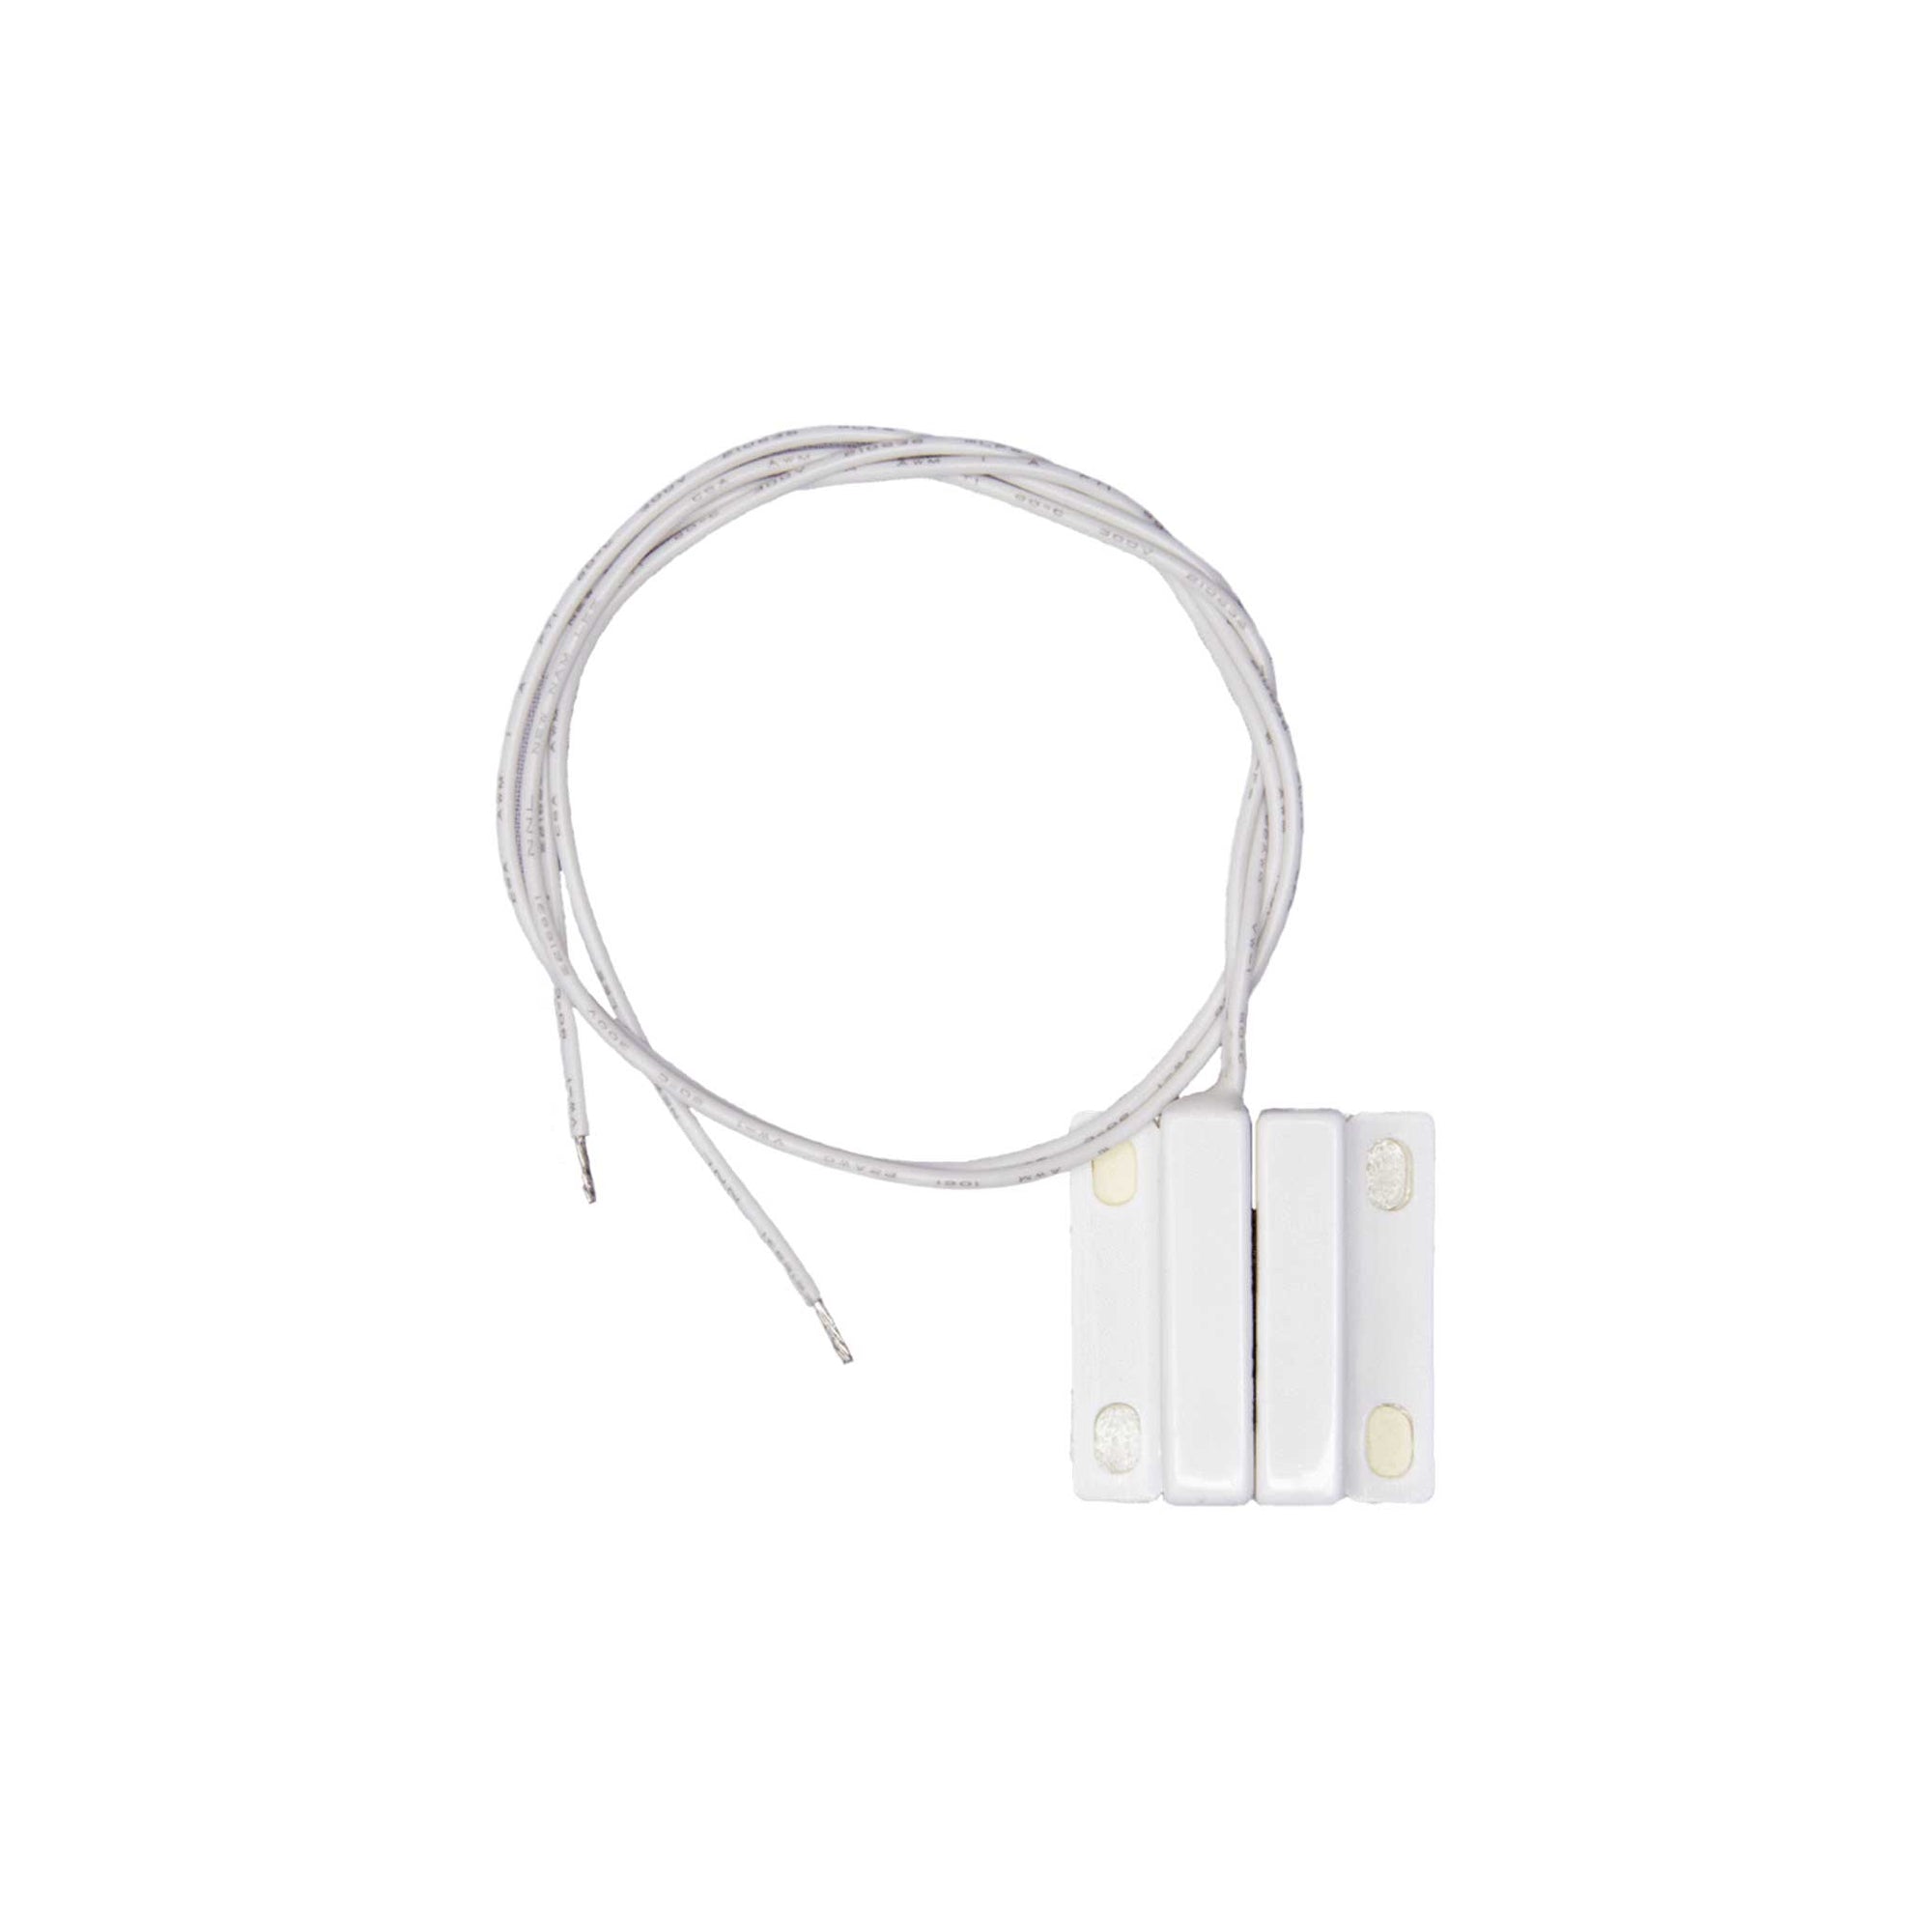 Magnetic Reed Switch for the PowerTechCS Remote Generator Monitoring System